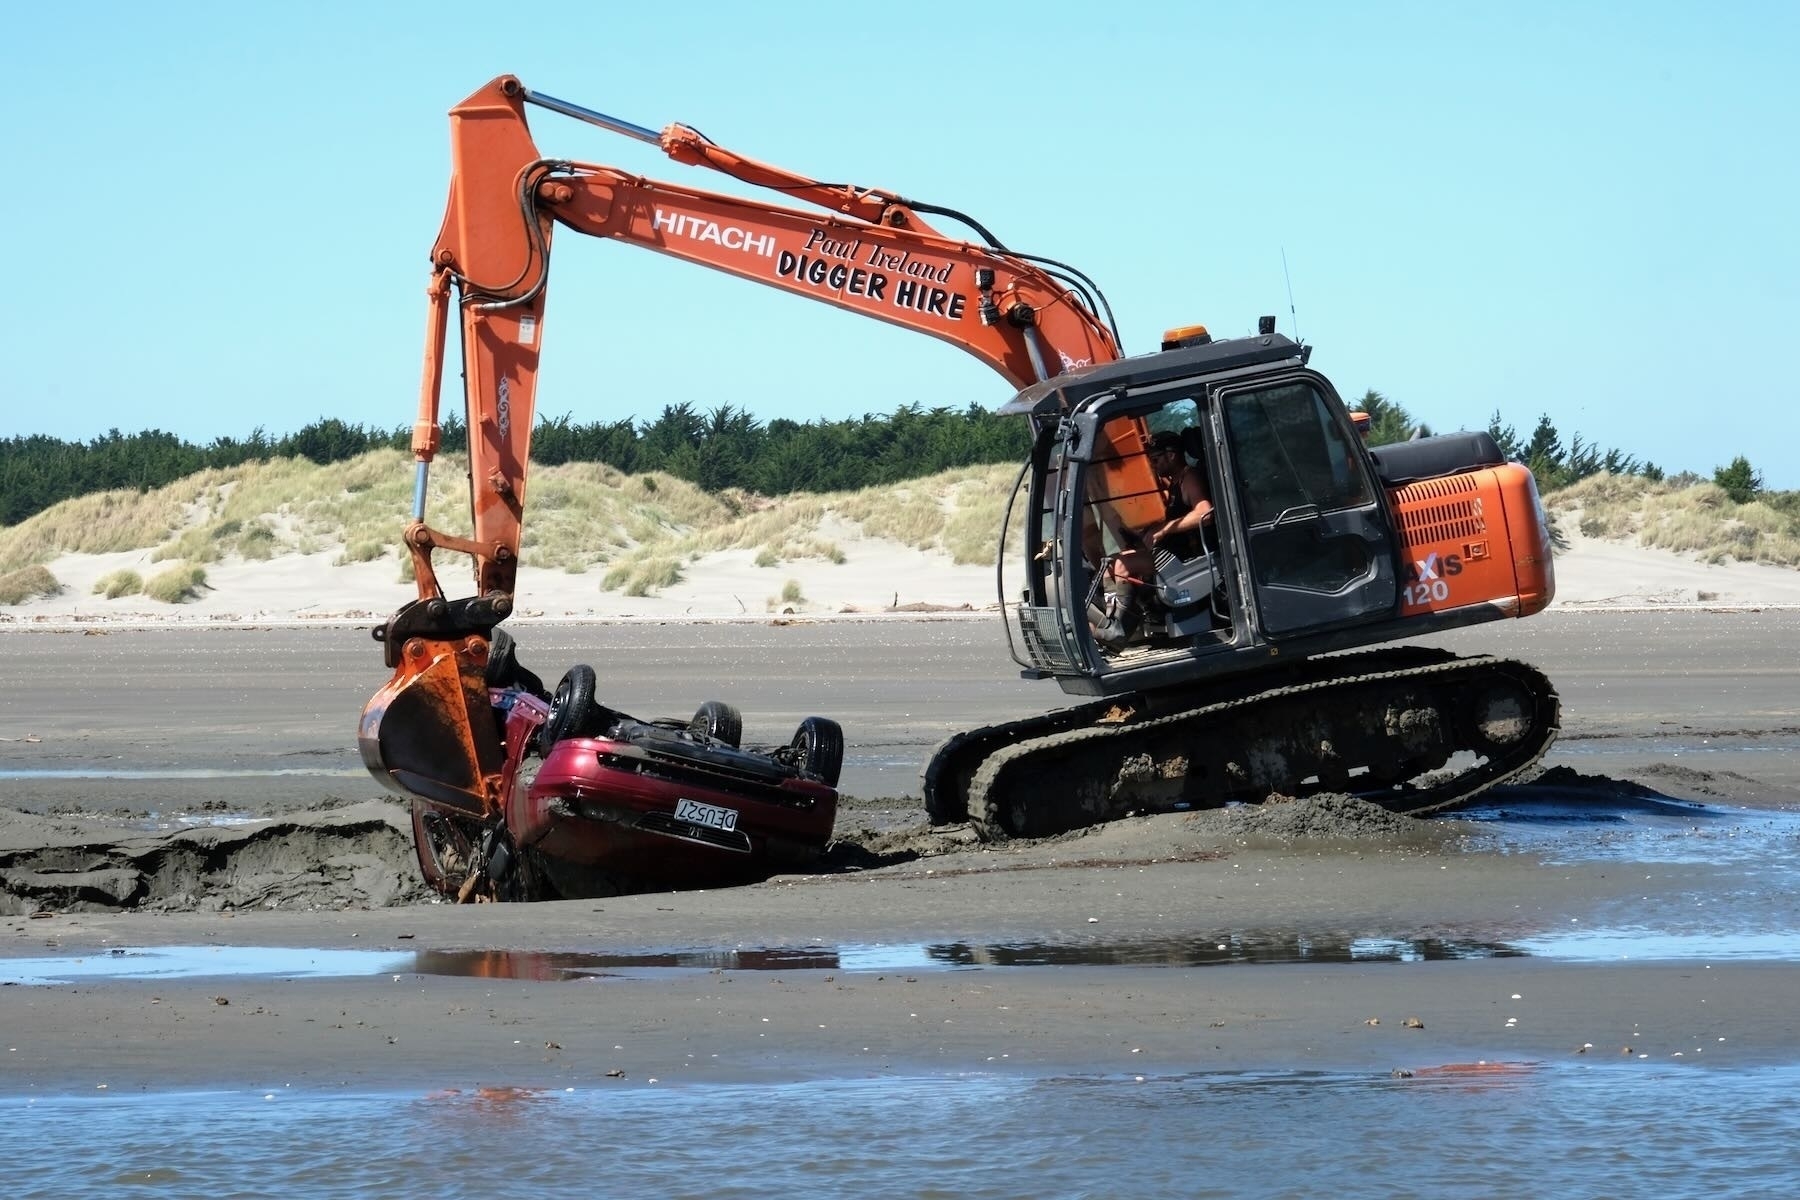 Digger removes abandoned car stuck in the sand. 